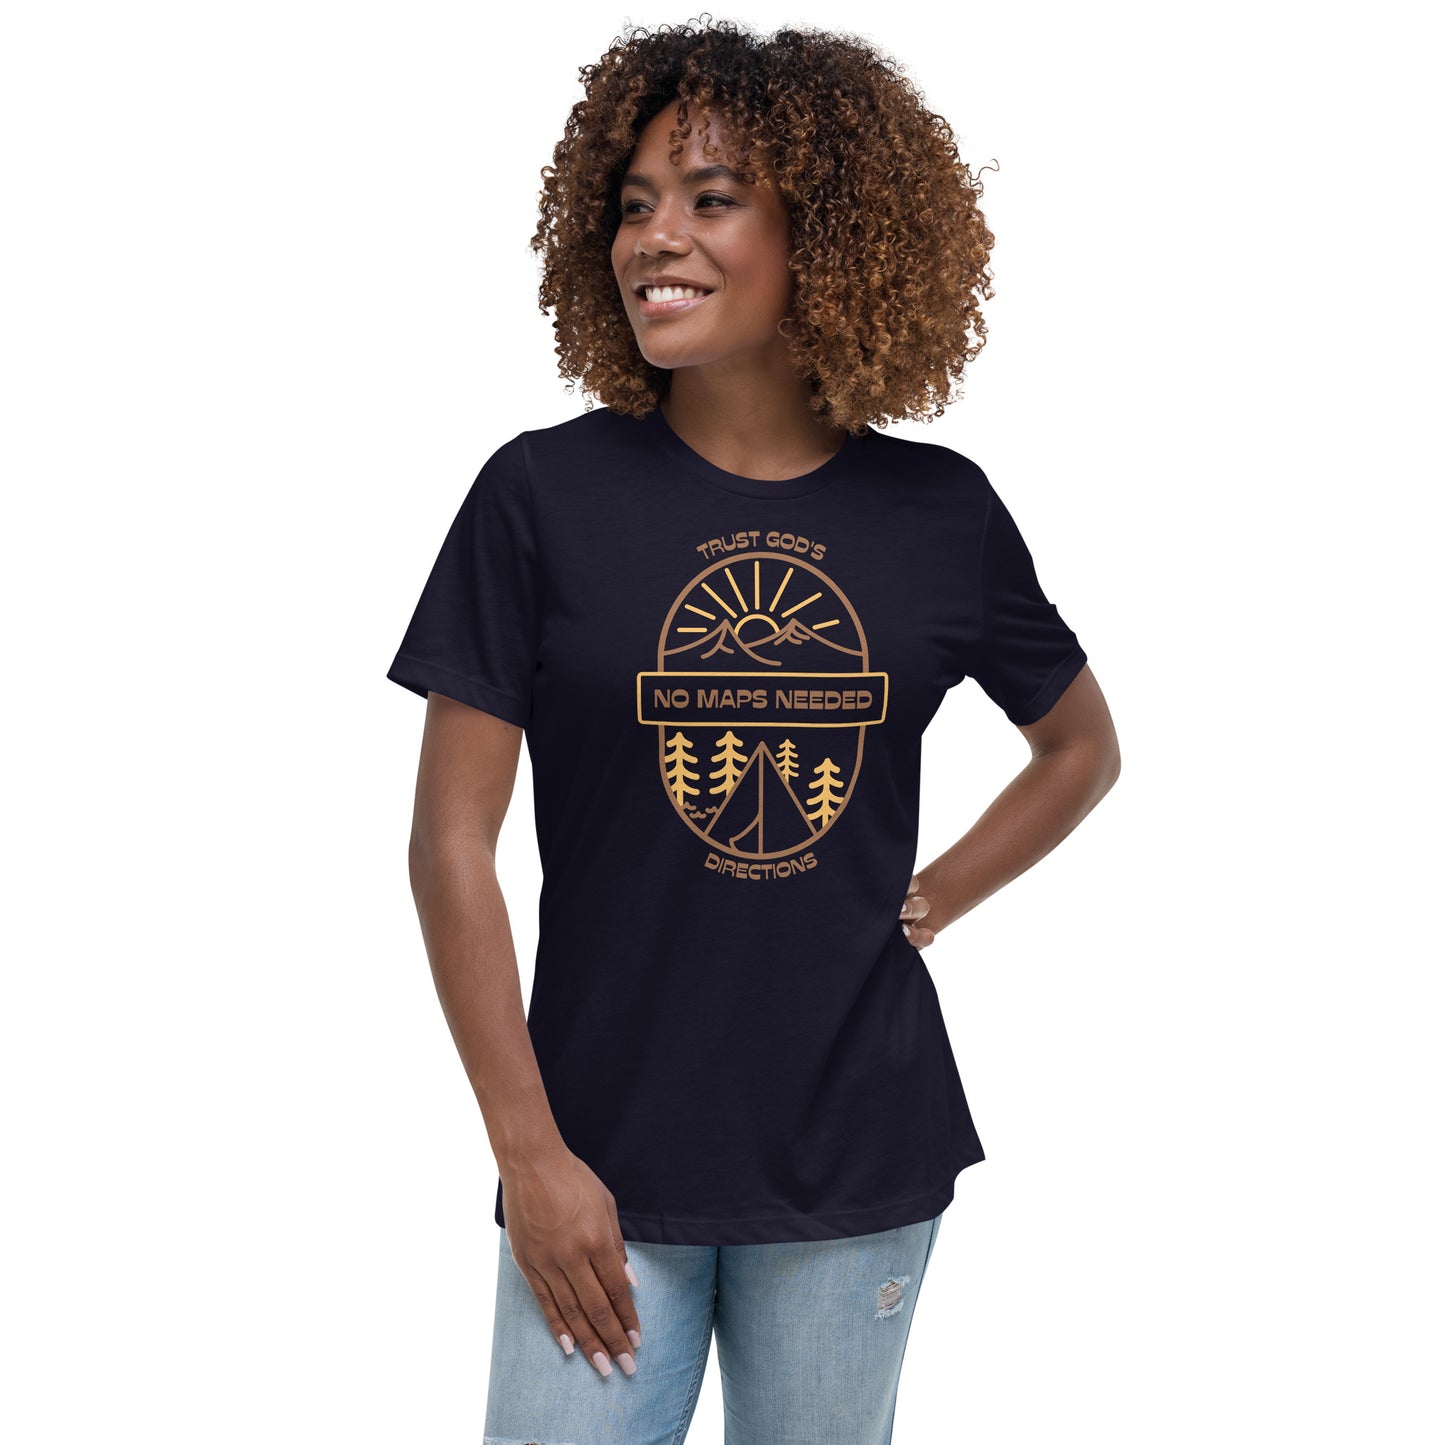 NO MAPS NEEDED - TRUST GOD'S DIRECTIONS Women's Relaxed T-Shirt